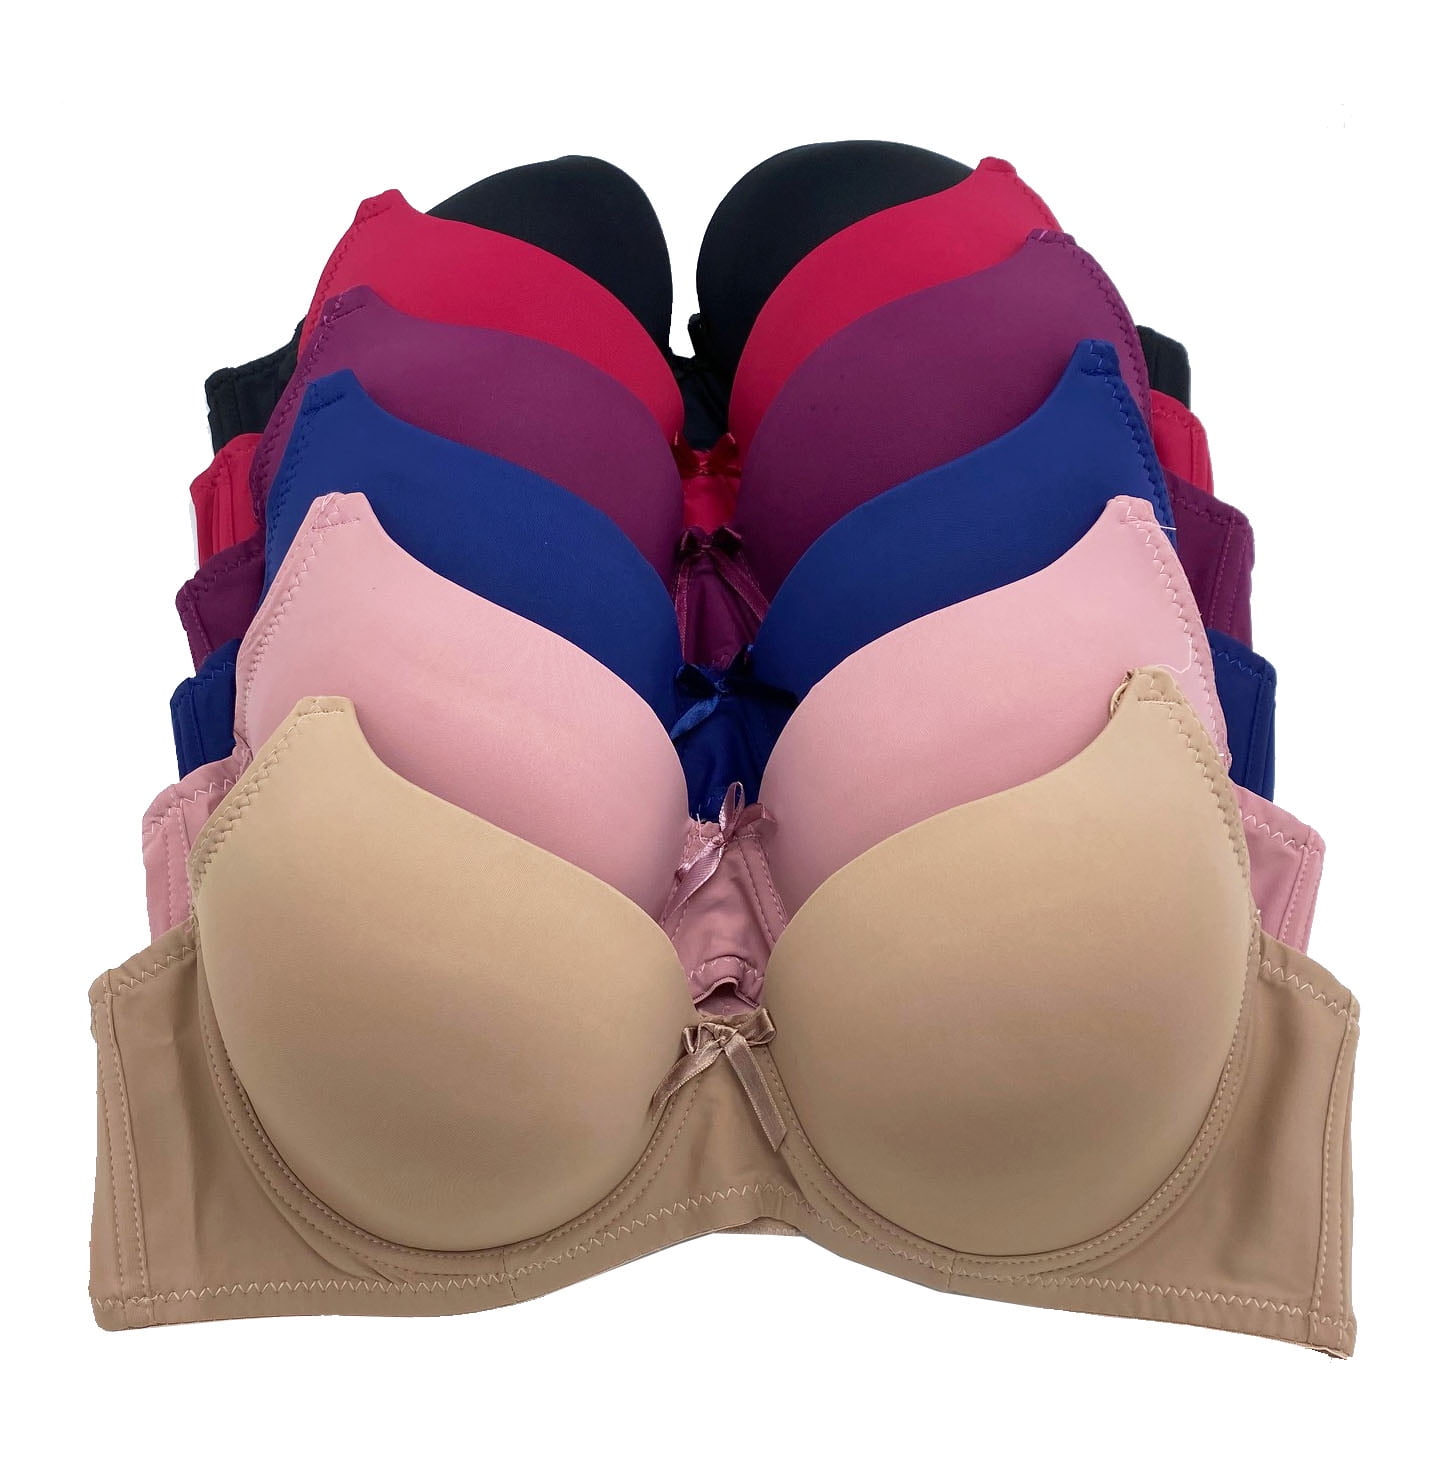 pack of 1-foam bra good quality (size 32 to 42) high recommended foam  brazier, sexy look sexy foam bra, very hot look